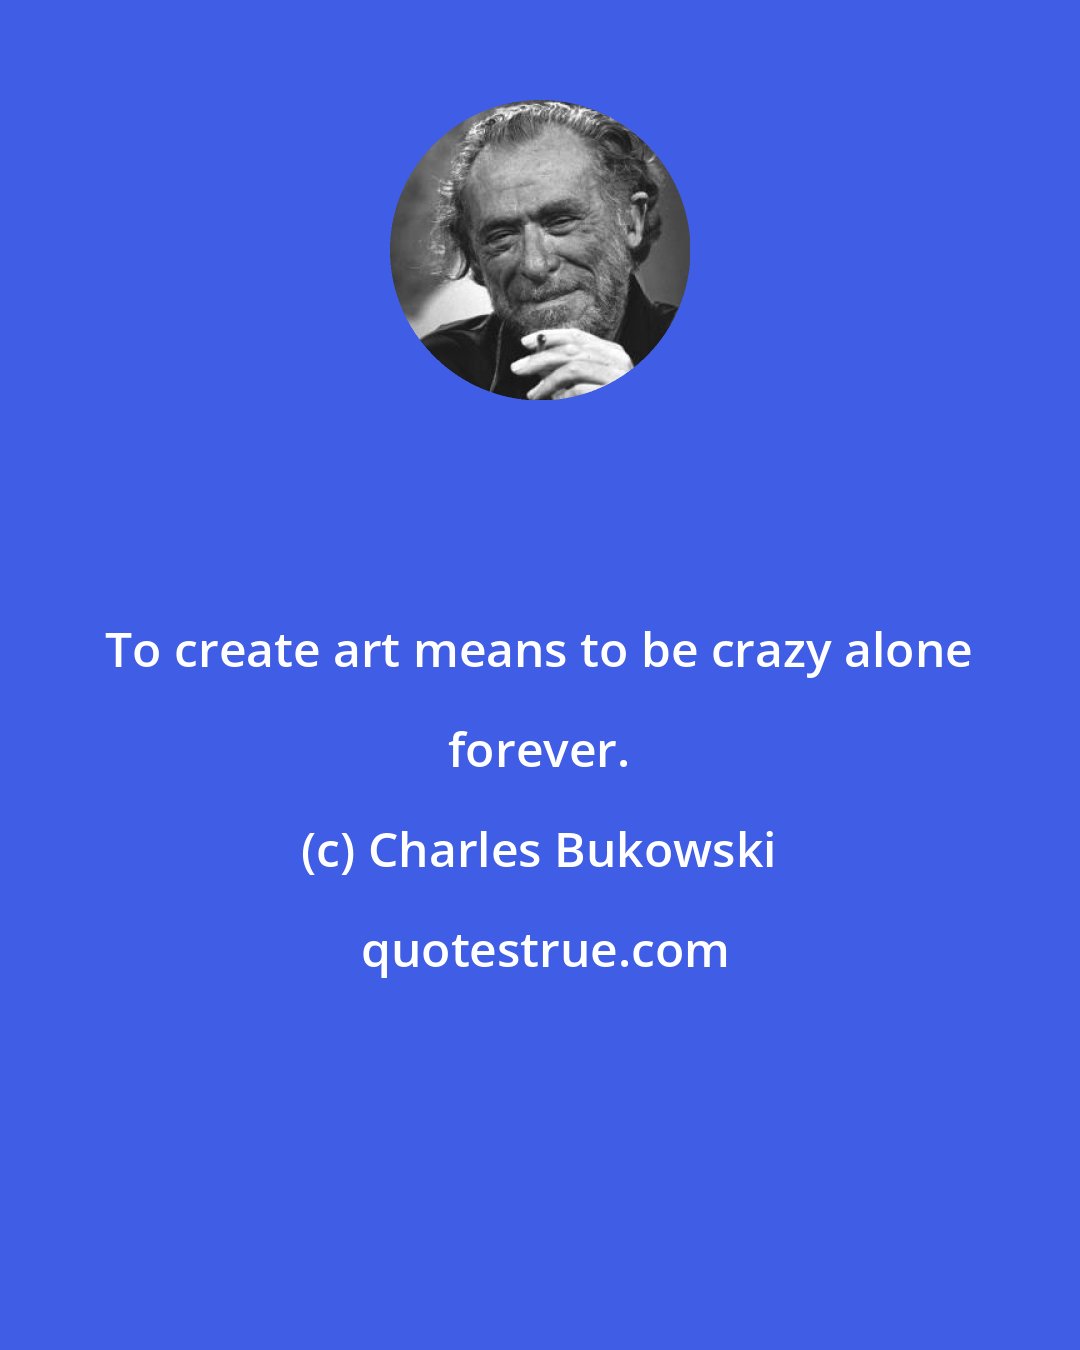 Charles Bukowski: To create art means to be crazy alone forever.